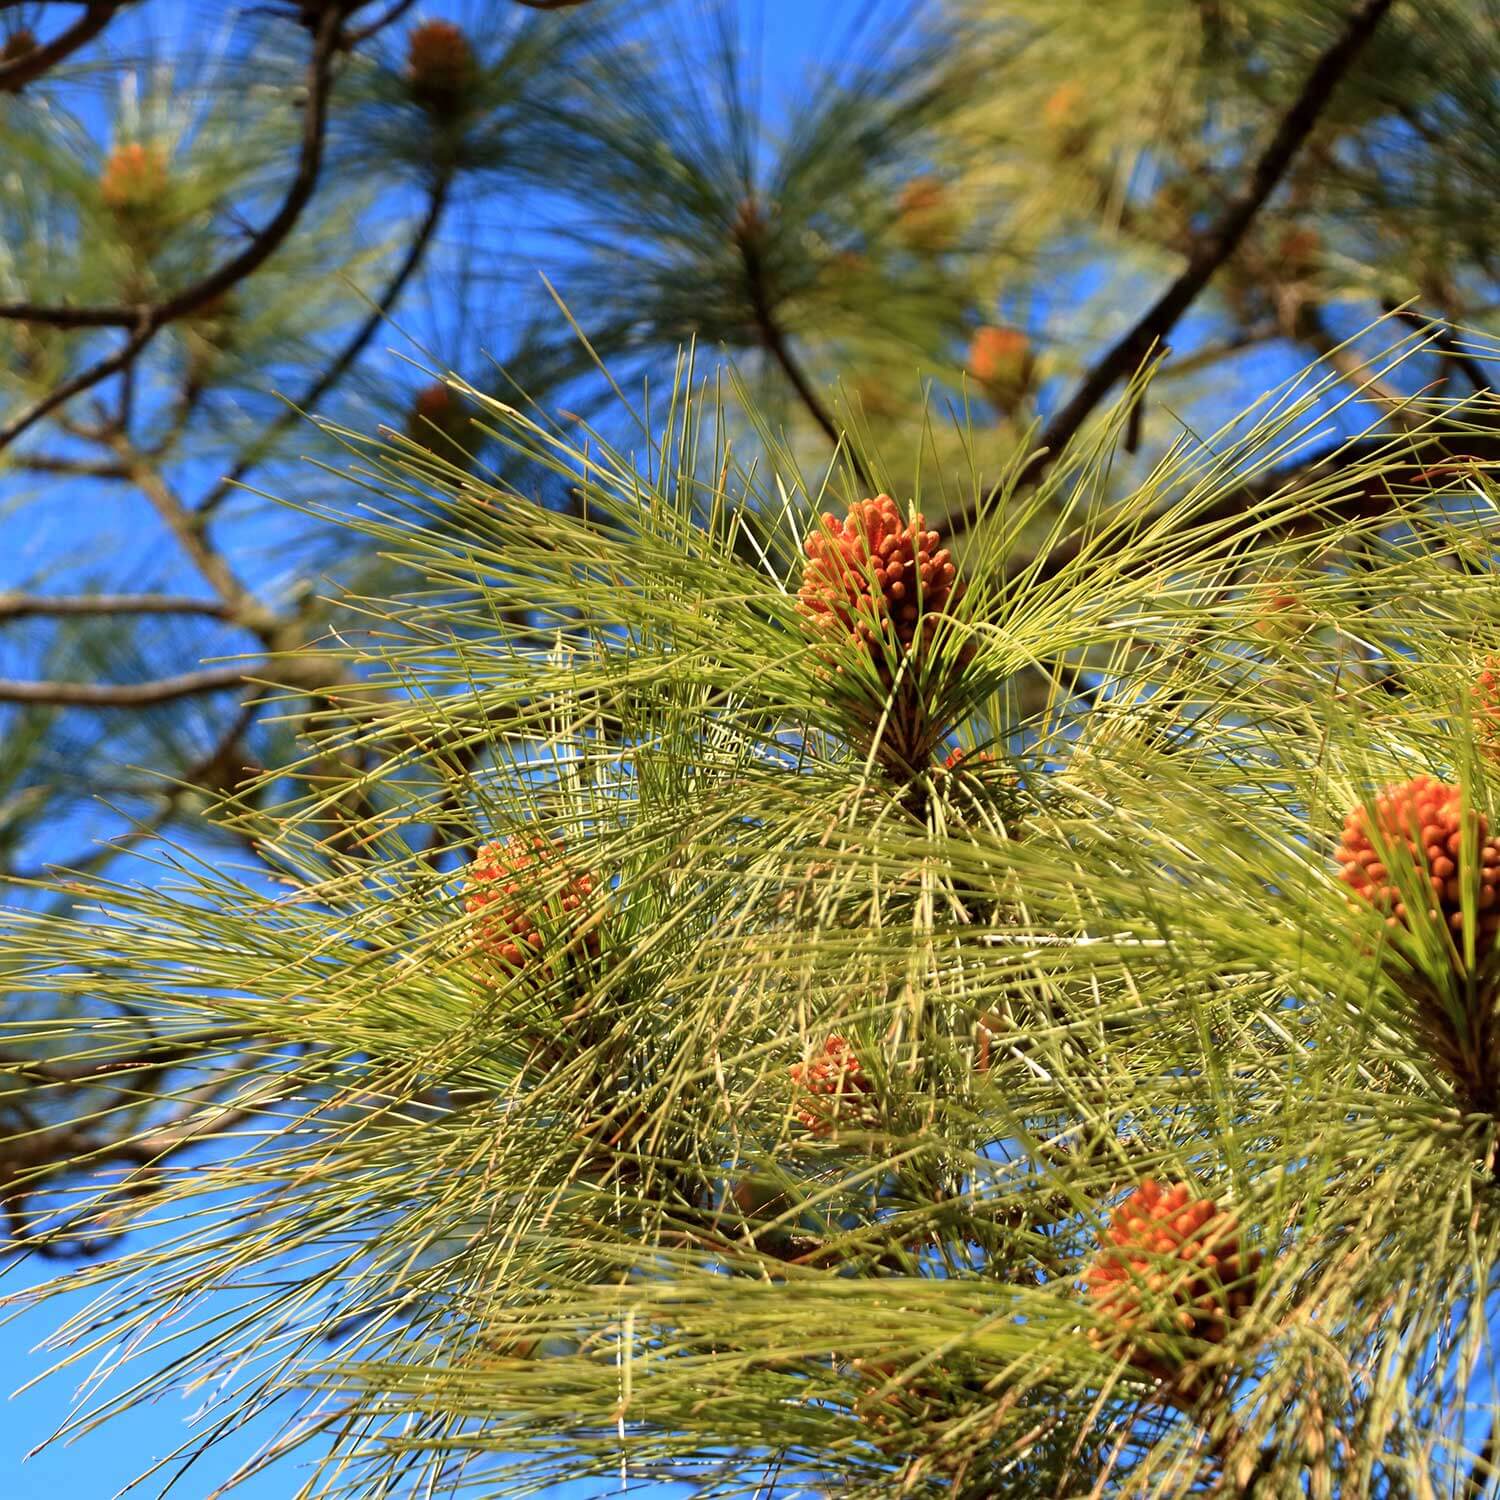 Close up of pine needles on Pinus Canariensis or Canary Island Pine tree